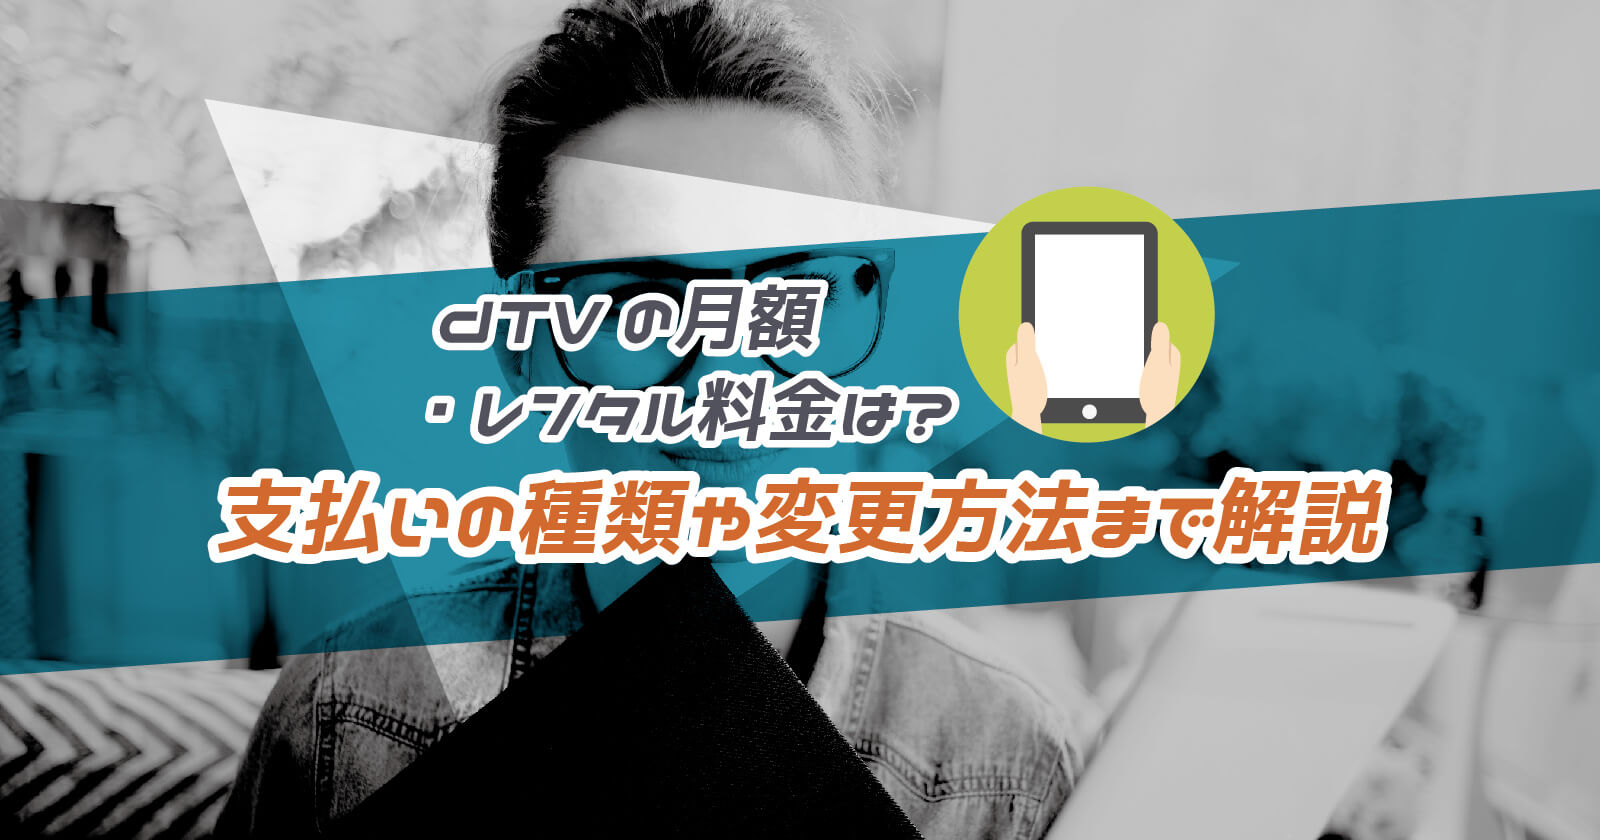 Dtvの料金は月額いくら 支払いの種類や変更方法 レンタル料金まで解説 To Be Soldout